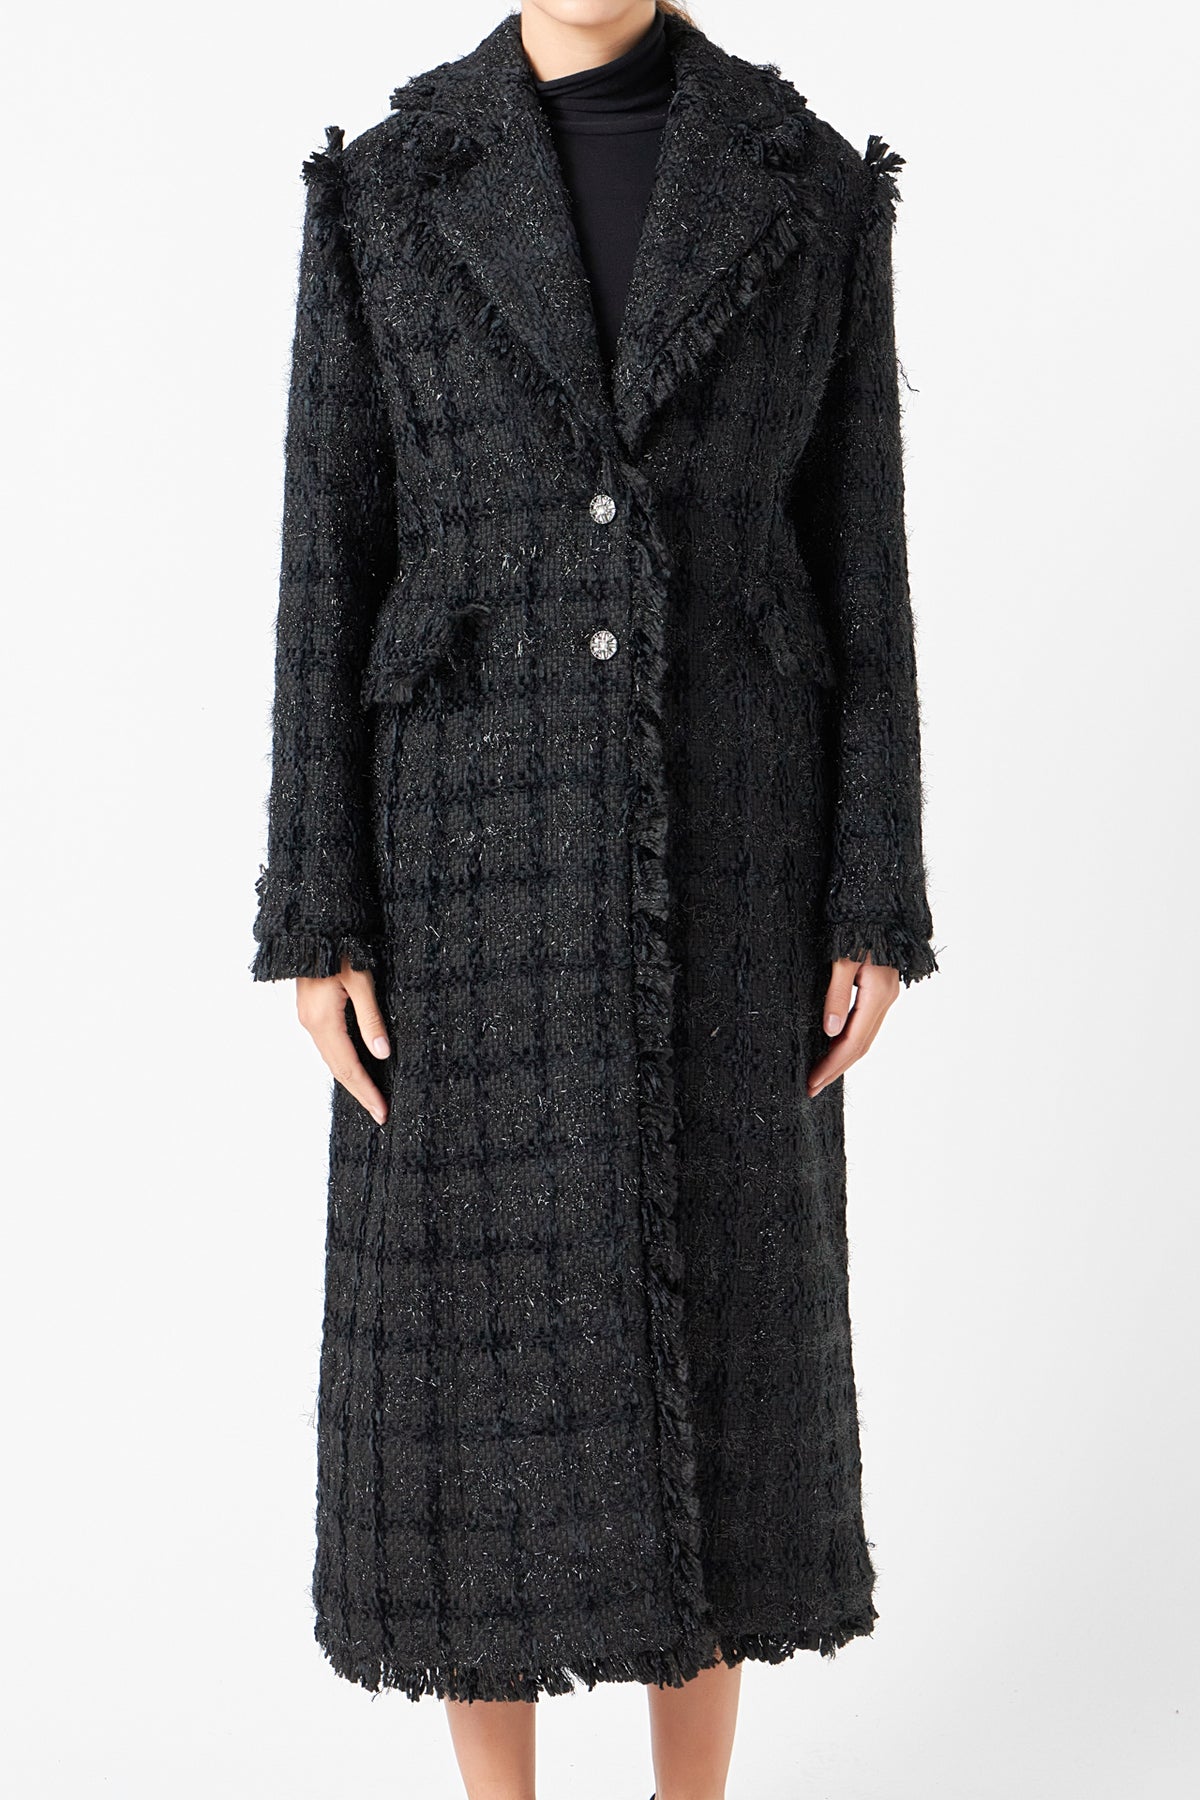 ENDLESS ROSE - Premium Long Tweed Coat - COATS available at Objectrare